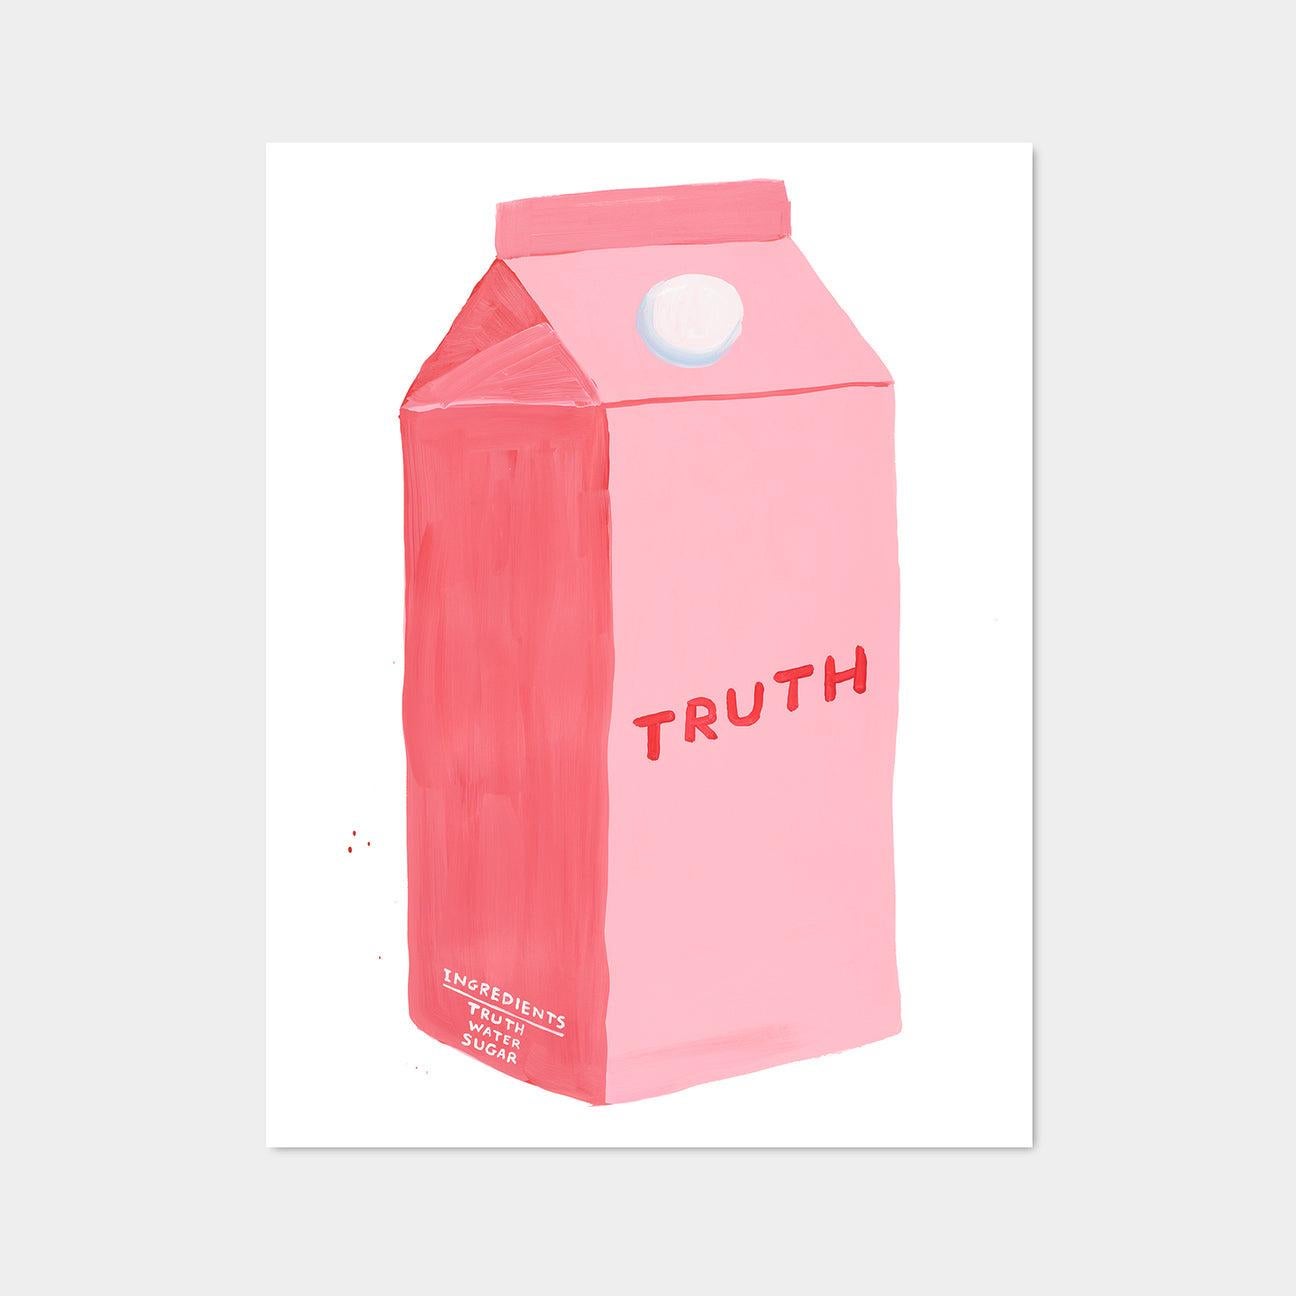 David Shrigley, Truth, 2020 

Off-set lithograph
Open edition, unframed 
60 x 80 cm (23.62 x 31.5 inches) 
Printed on 200g Munken Lynx paper by Narayana Press in Denmark 

This print is based on the original acrylic on paper work by Shrigley. Please